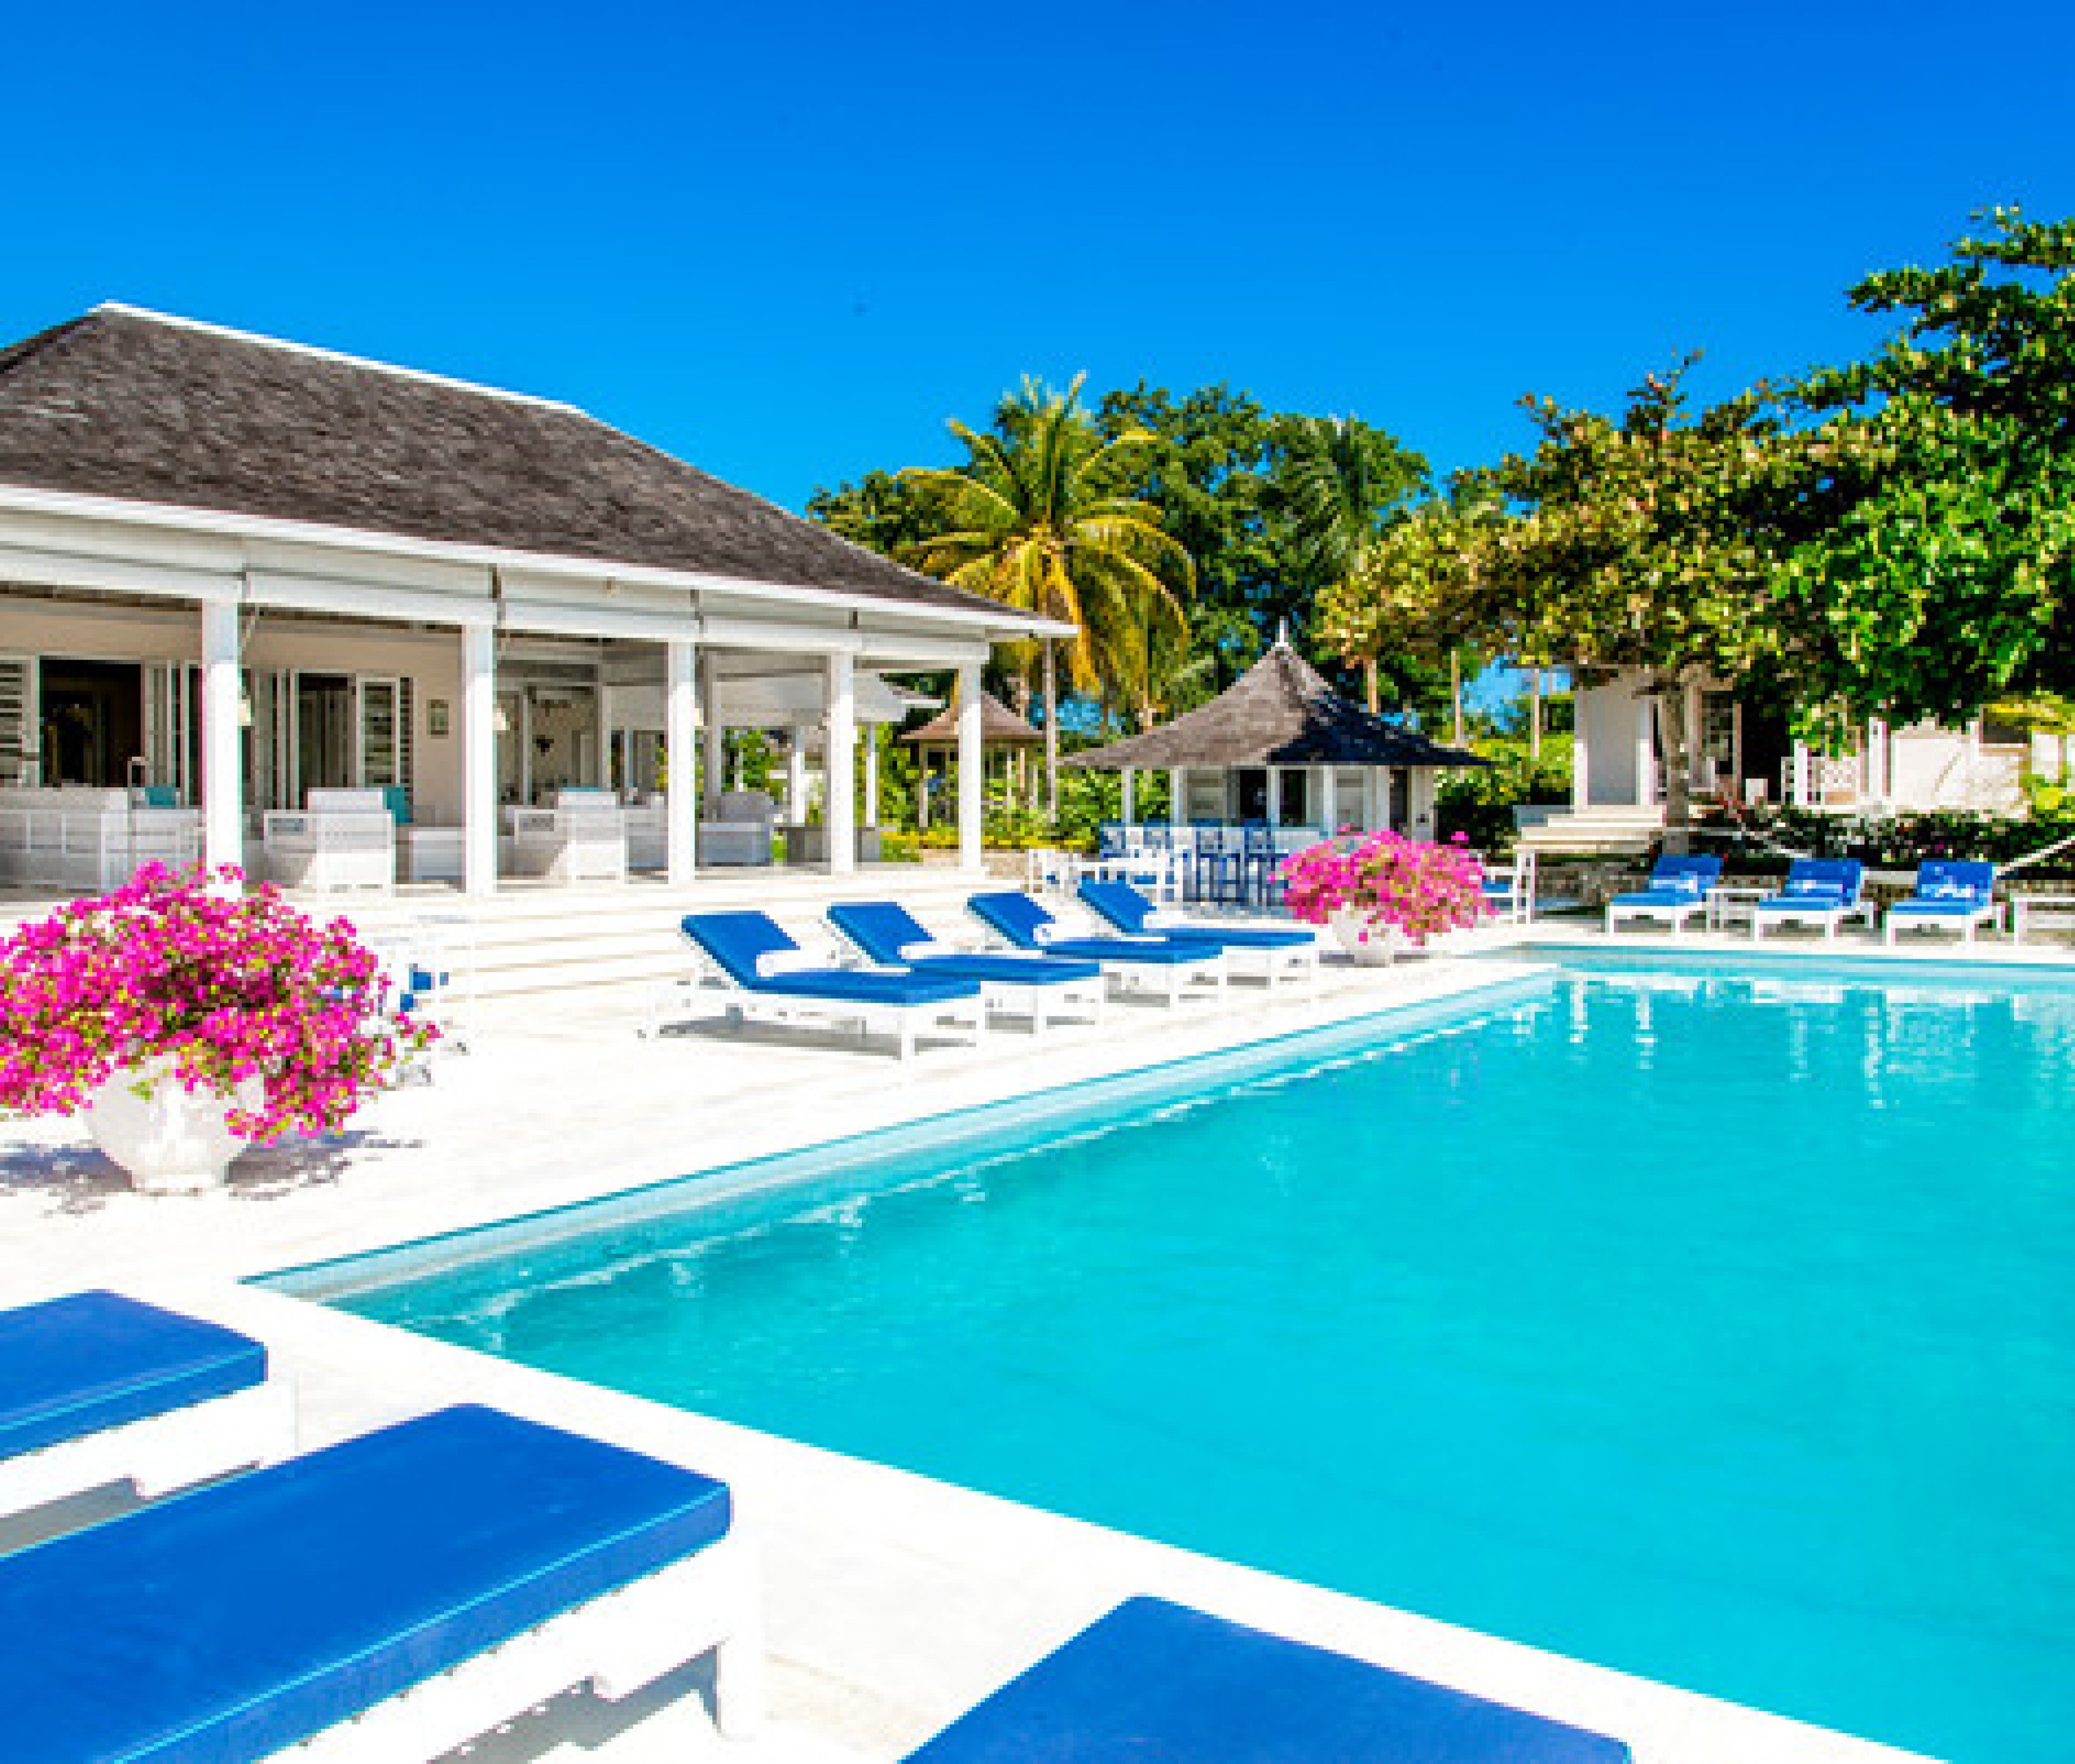 https://www.thetopvillas.com/destinations/caribbean/jamaica/montego-bay/tryall-club/bumpers-nest-at-the-tryall-club/